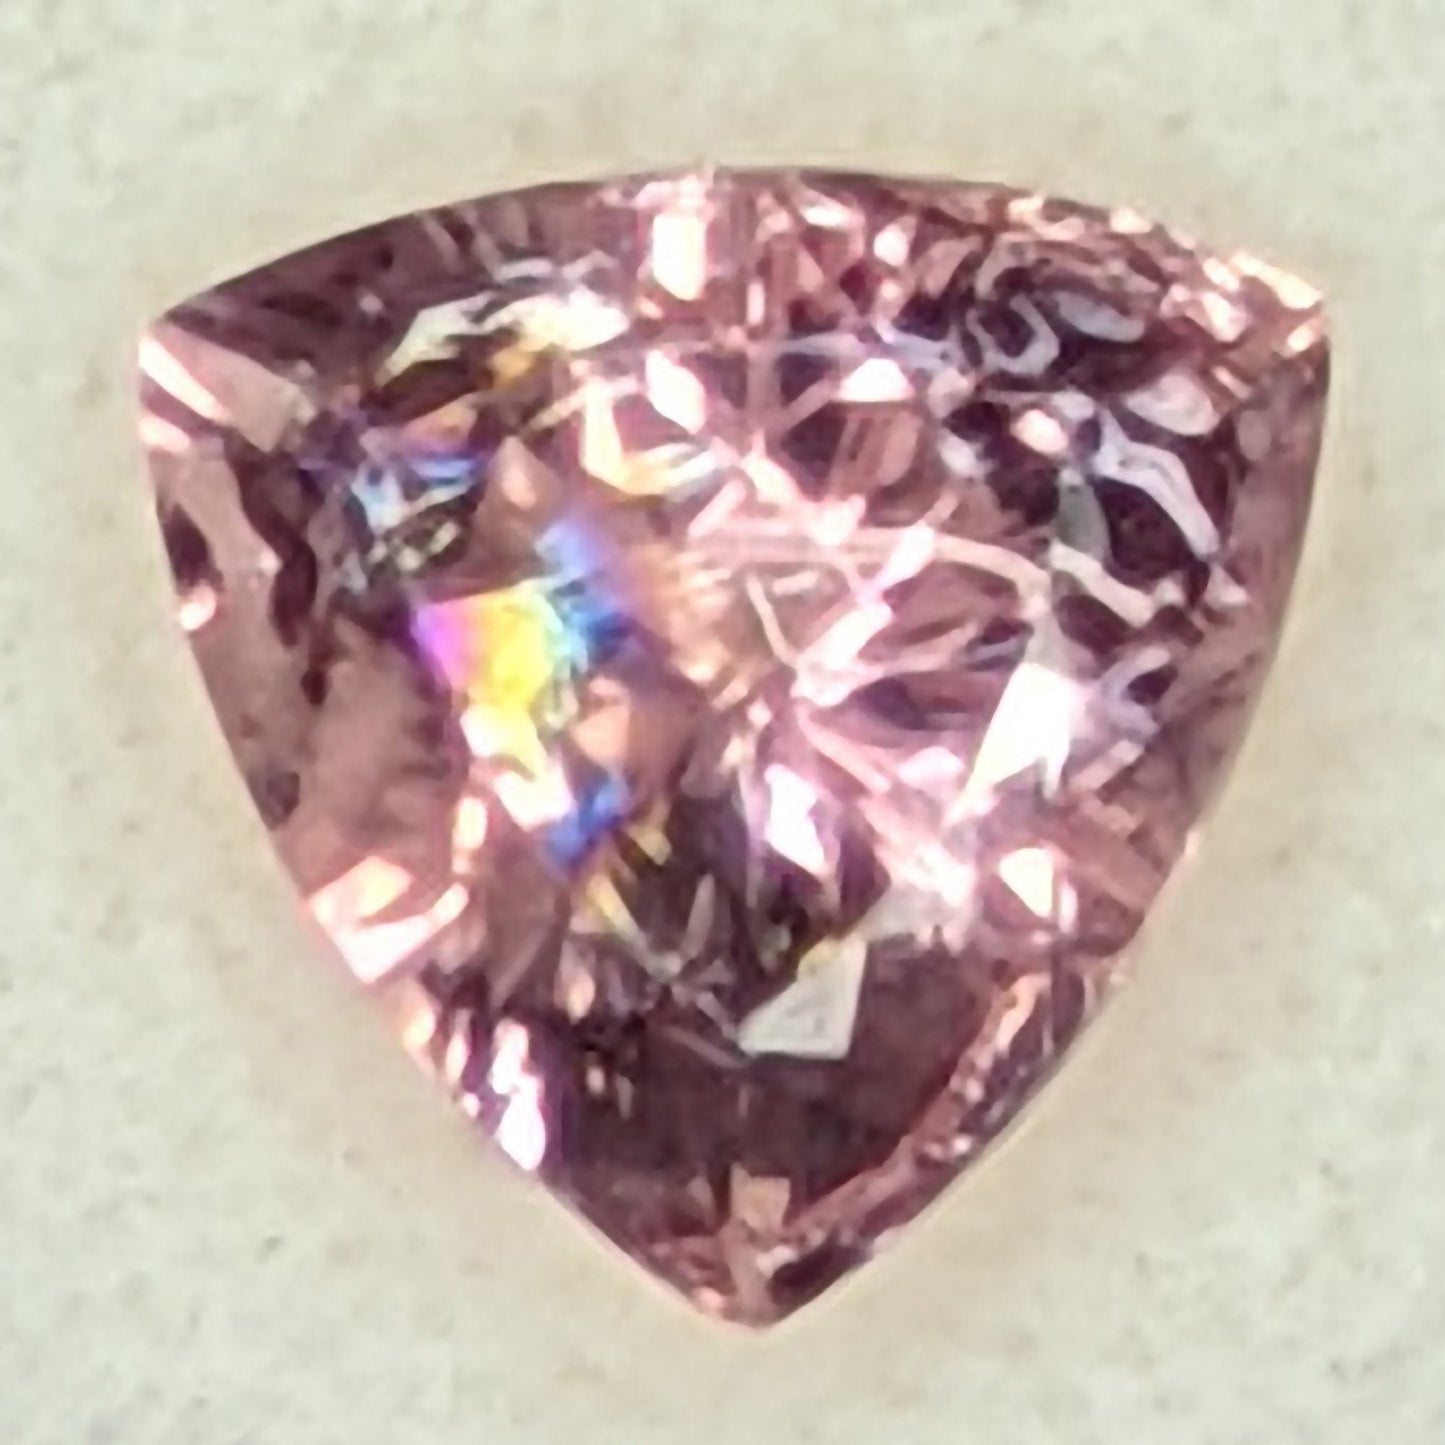 ATTENTION! Lovers of PINK! A GORGEOUS, nearly 5 carat bubble-gum pink Tourmaline!